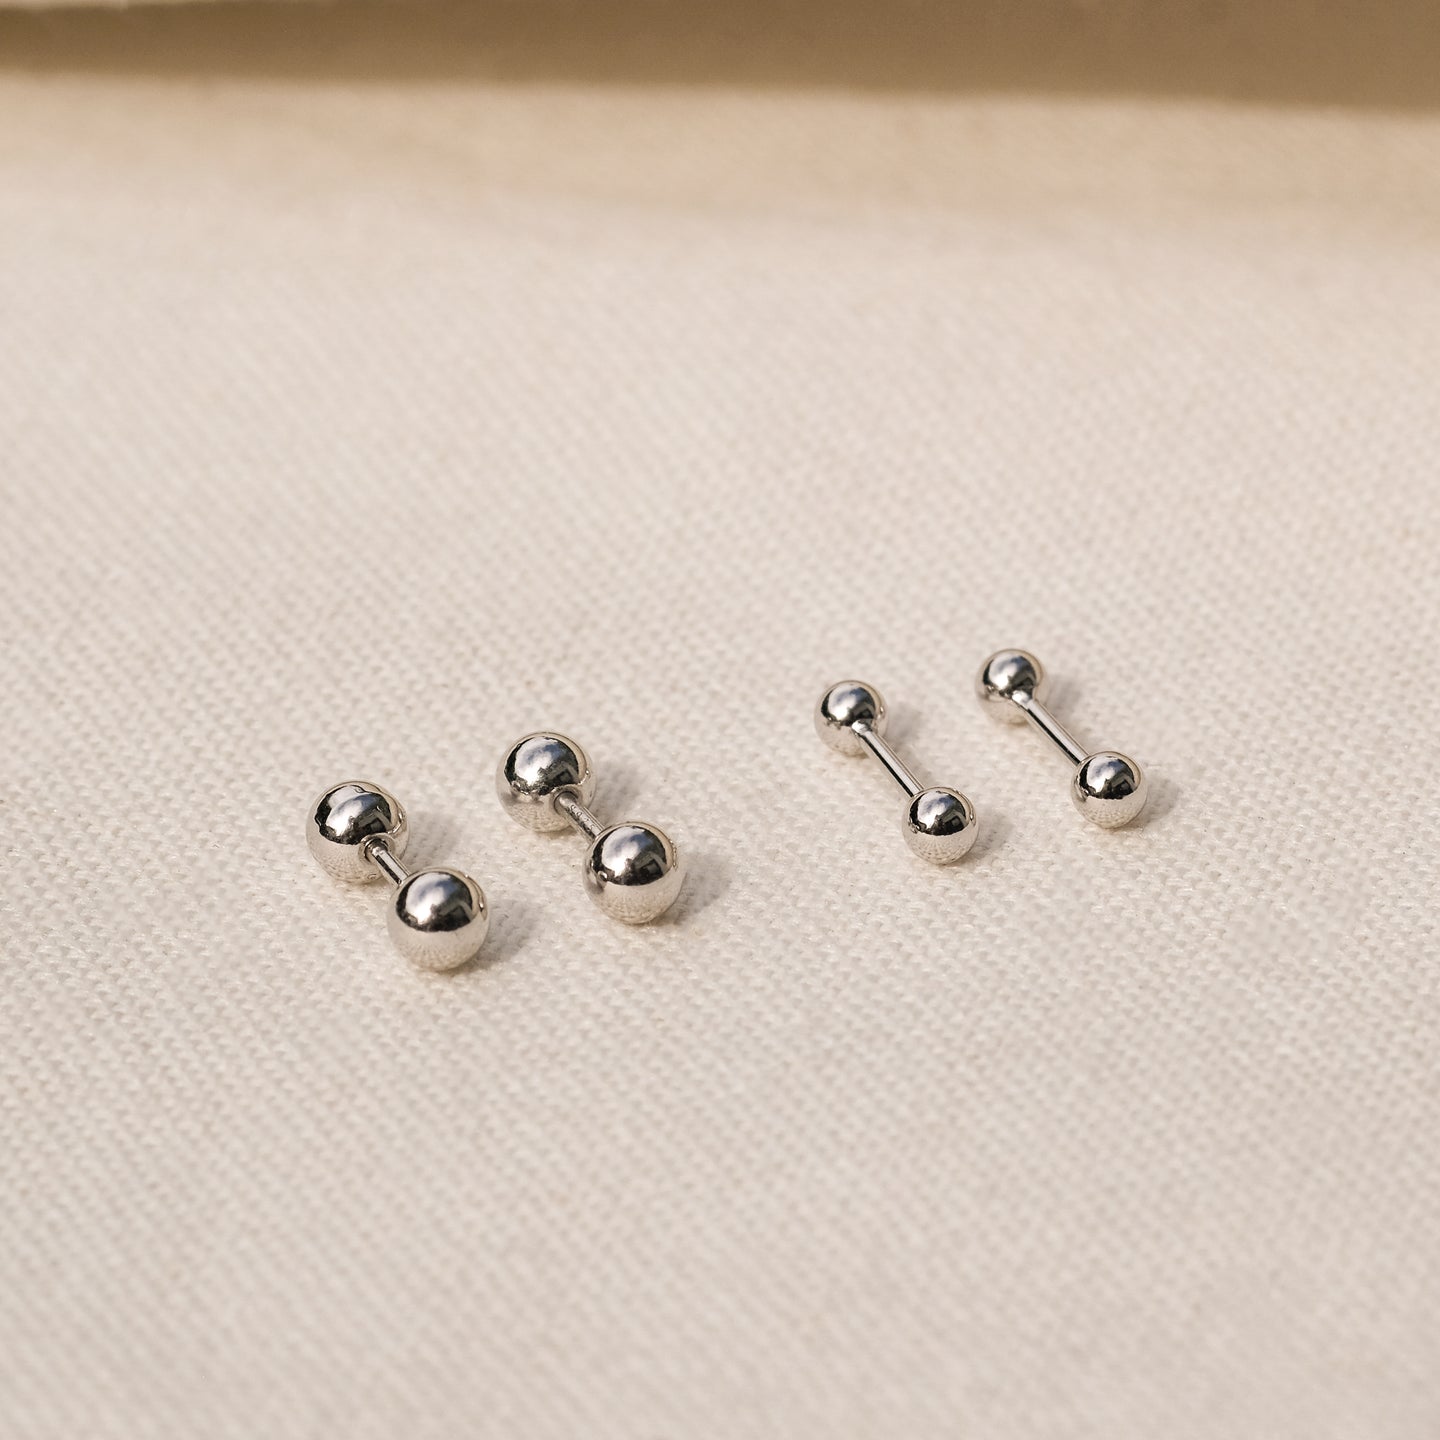 products/hola-tiny-studs-925-sterling-silver-2.jpg